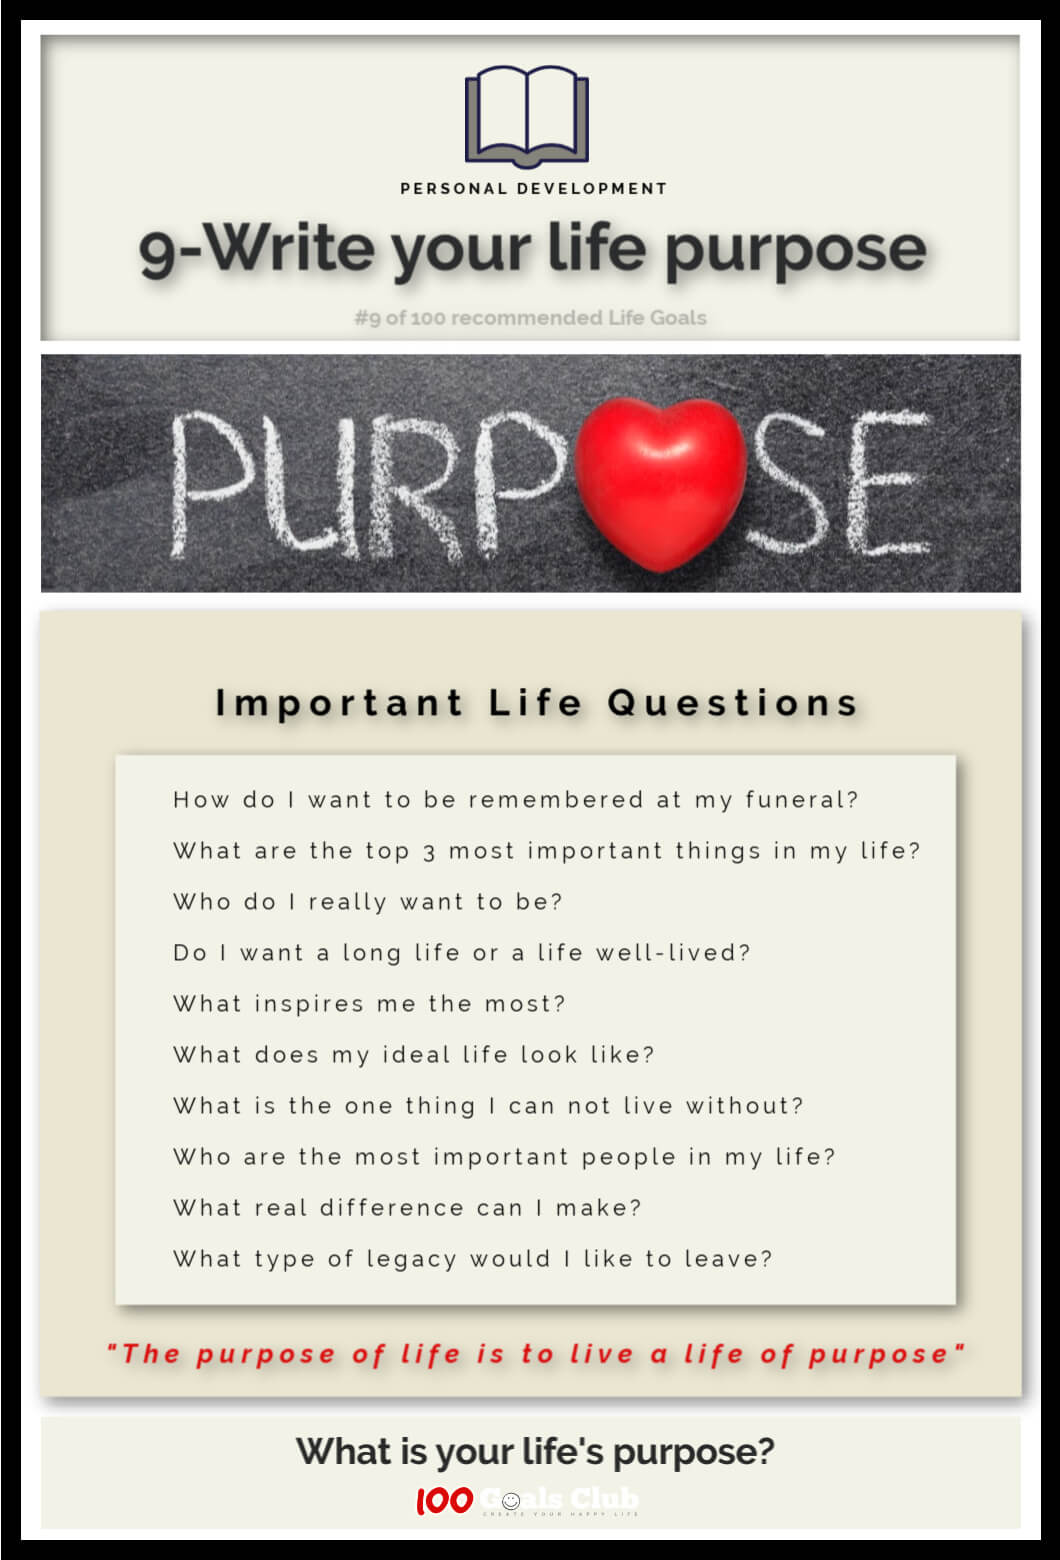 my purpose in life essay brainly 250 words